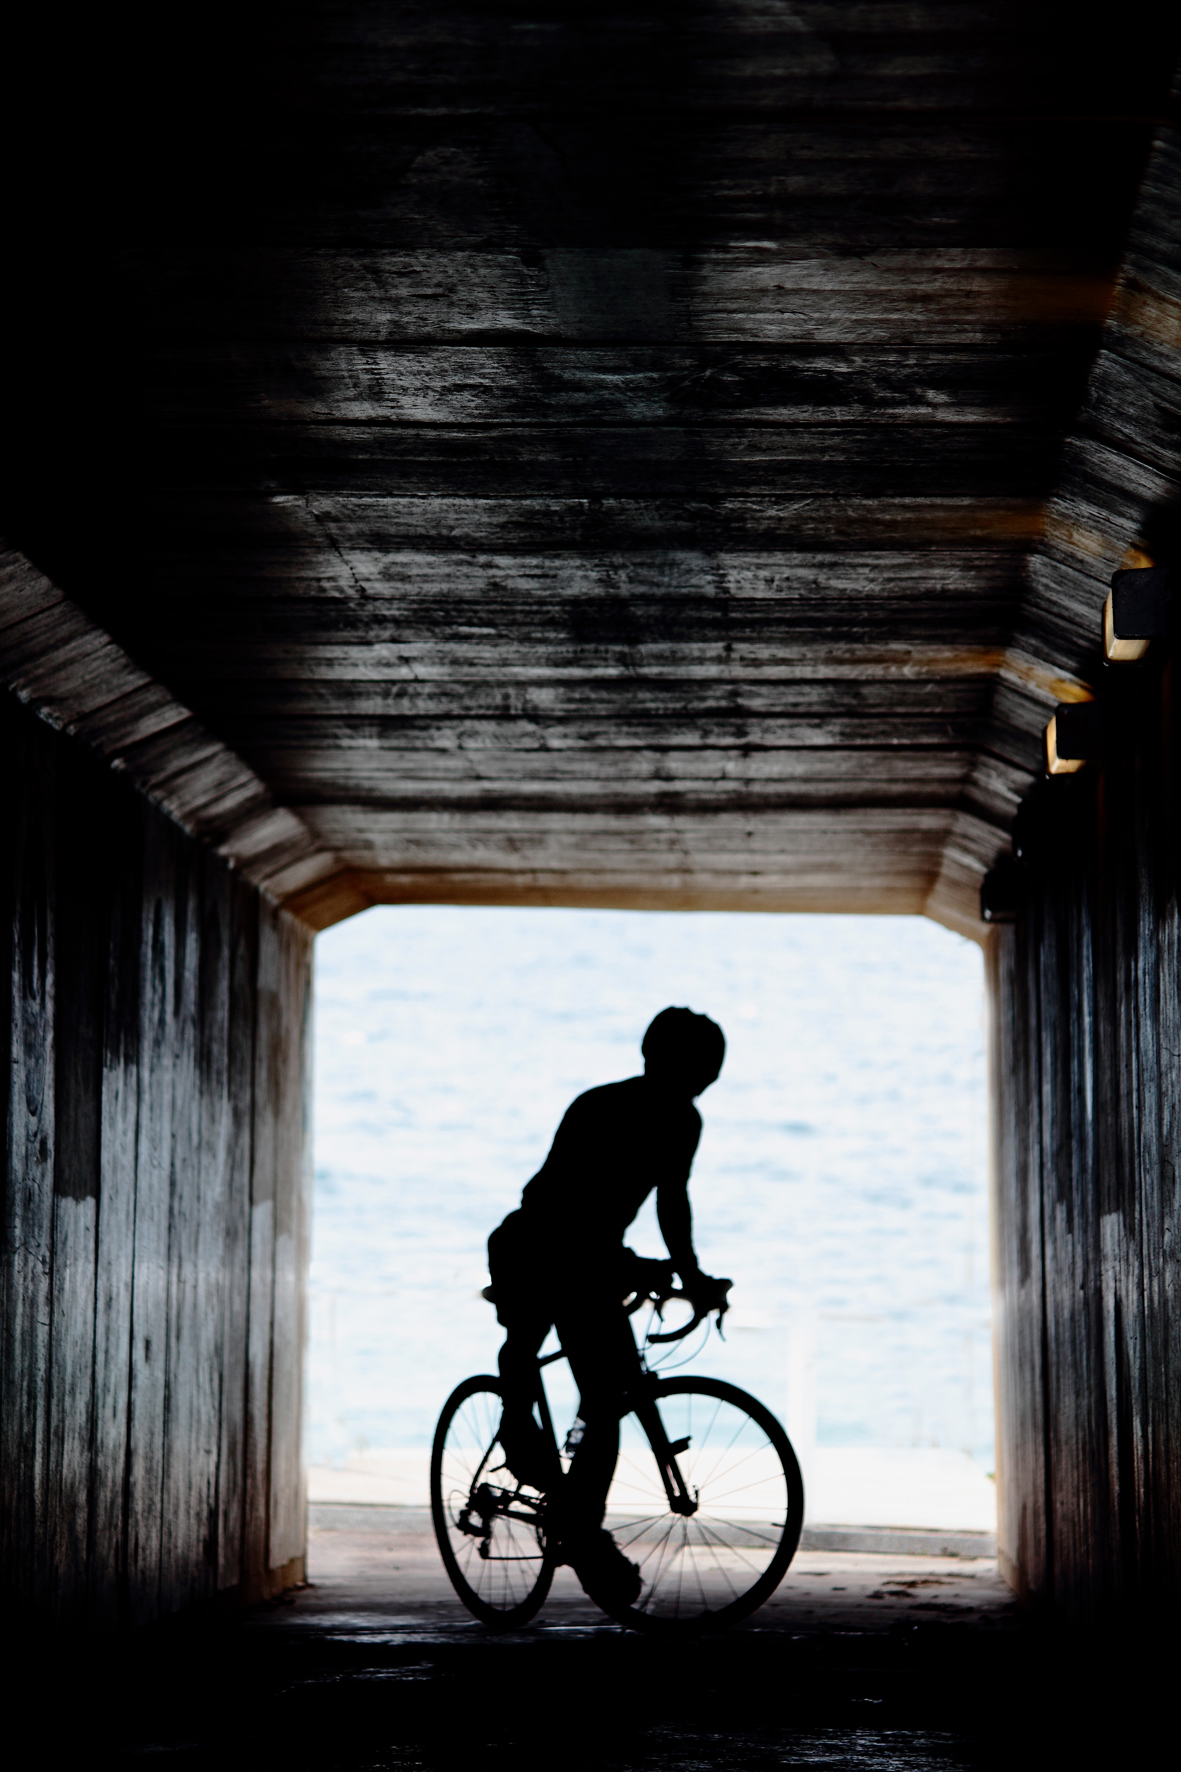 Cyclist in tunnel photo